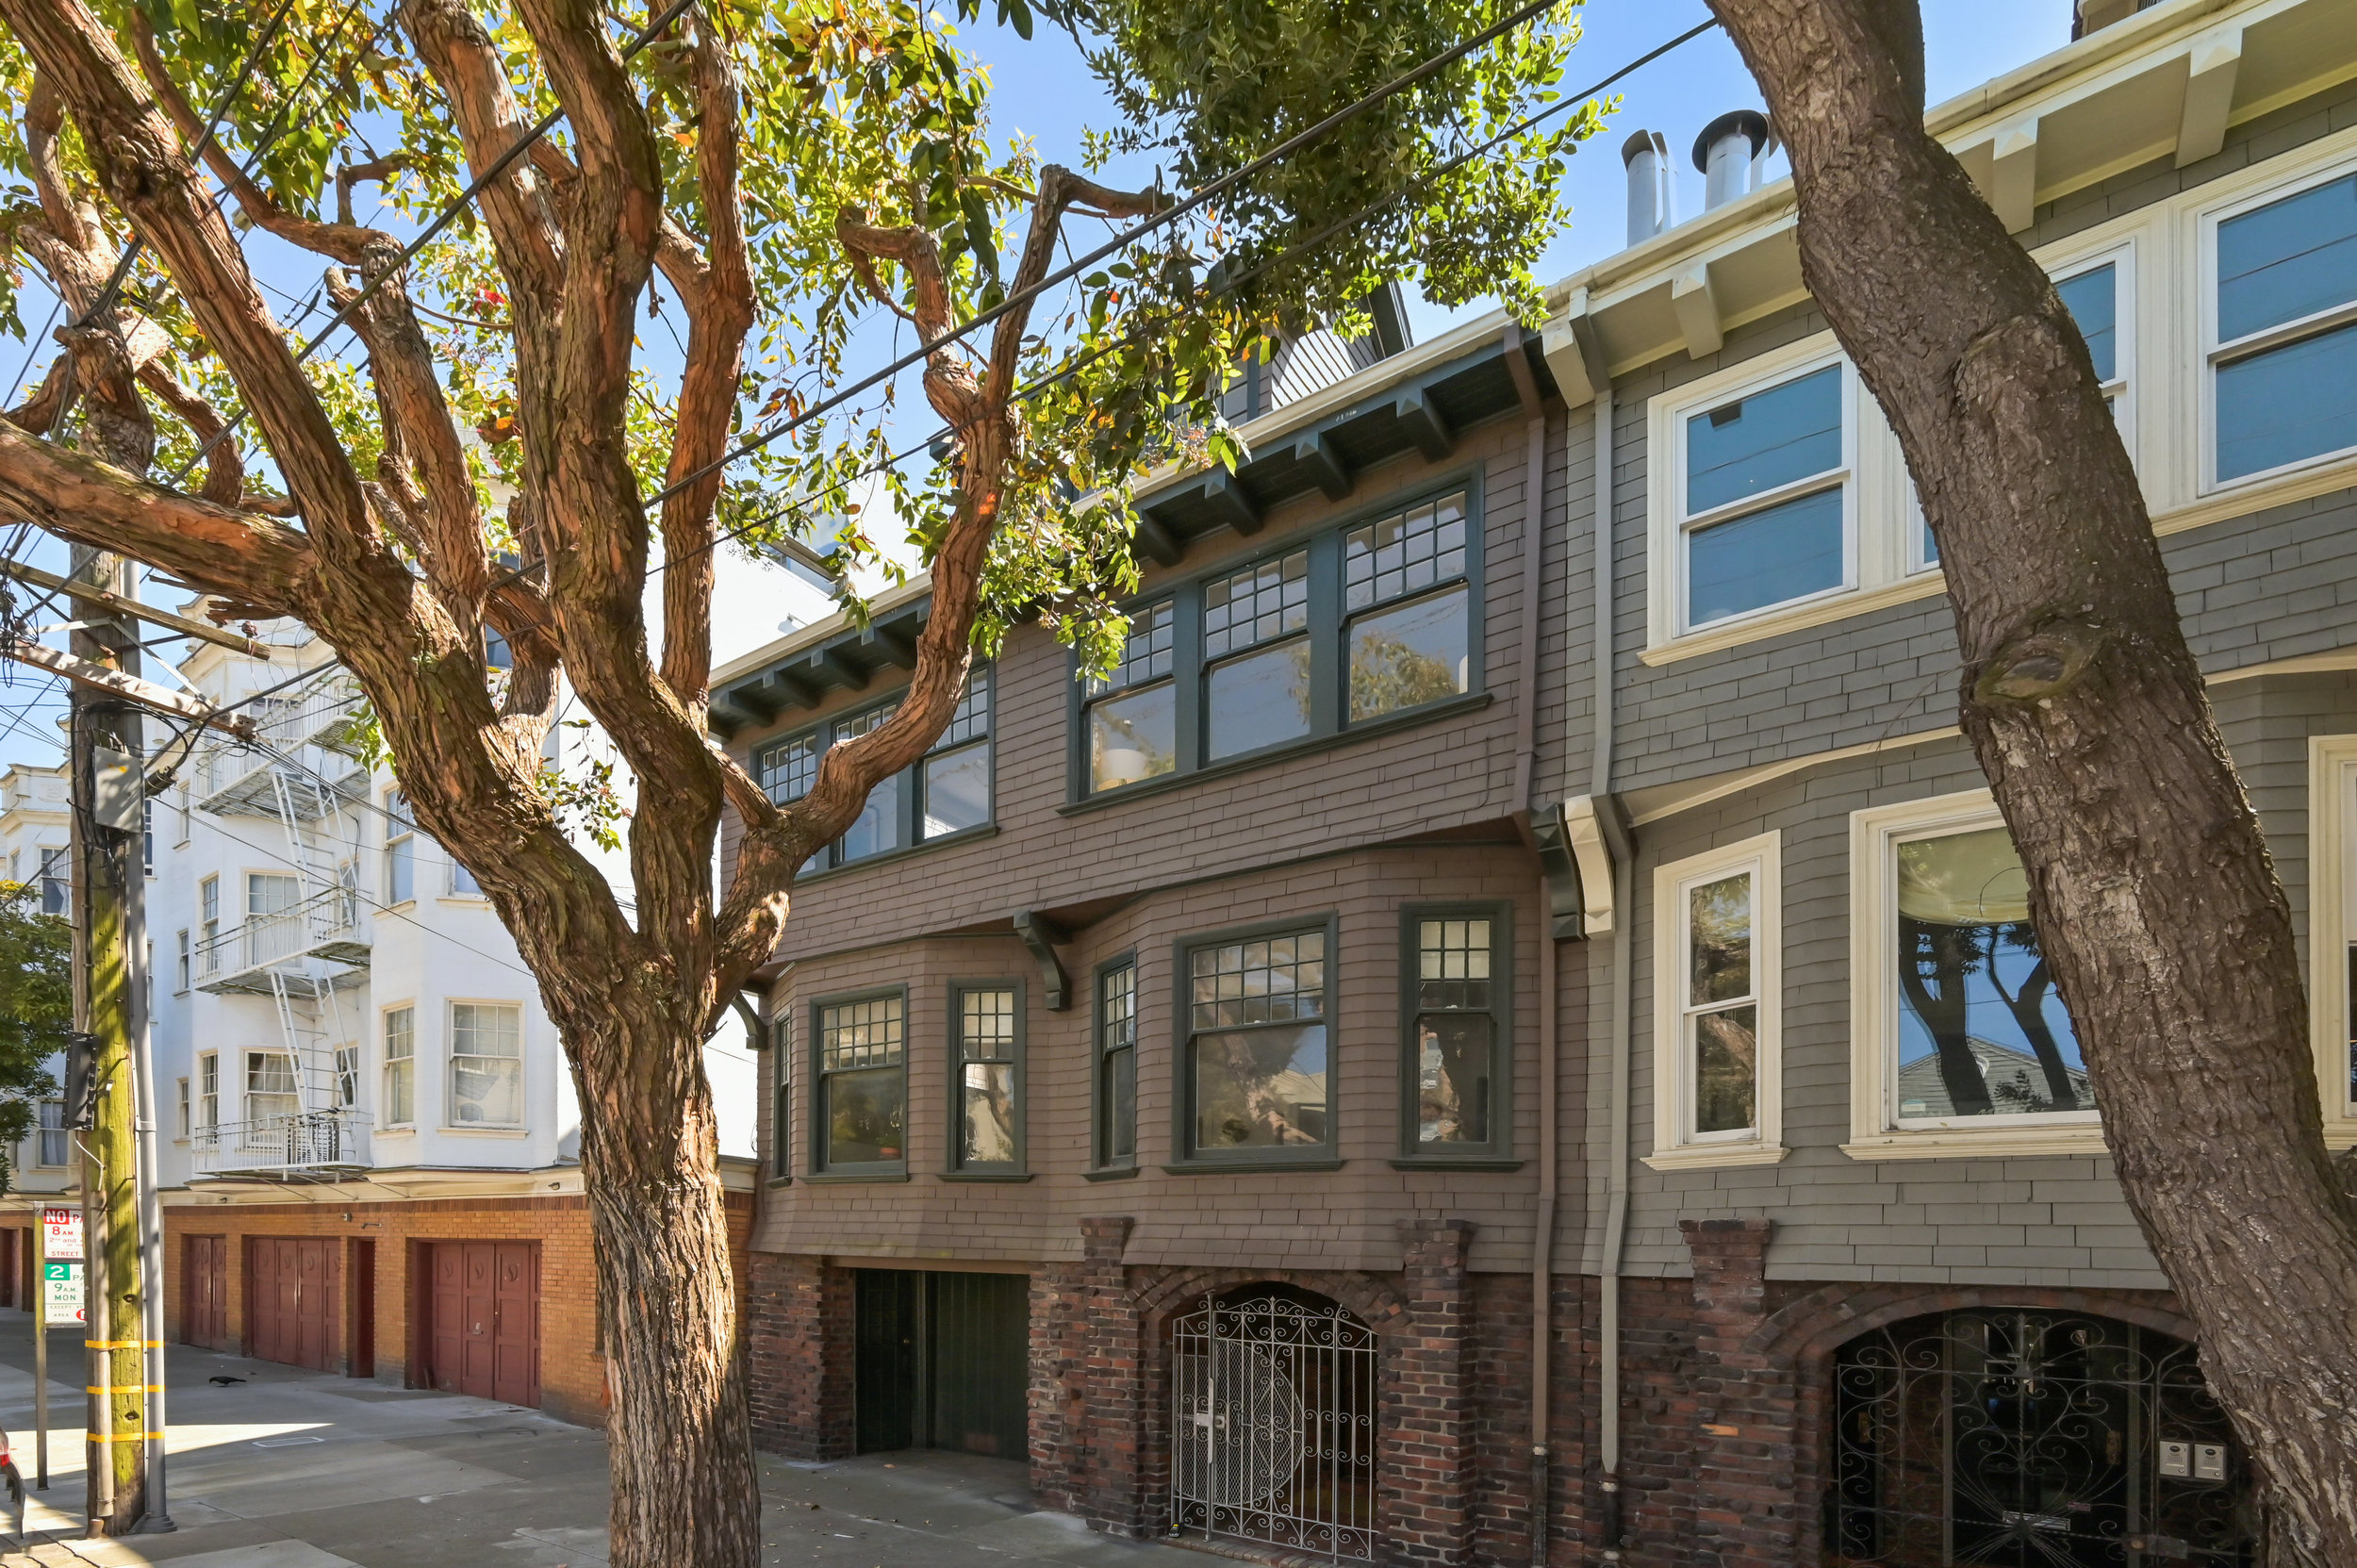 Property Photo: View of the facade for 637-639 Lake Street, showing a two story home in San Francisco